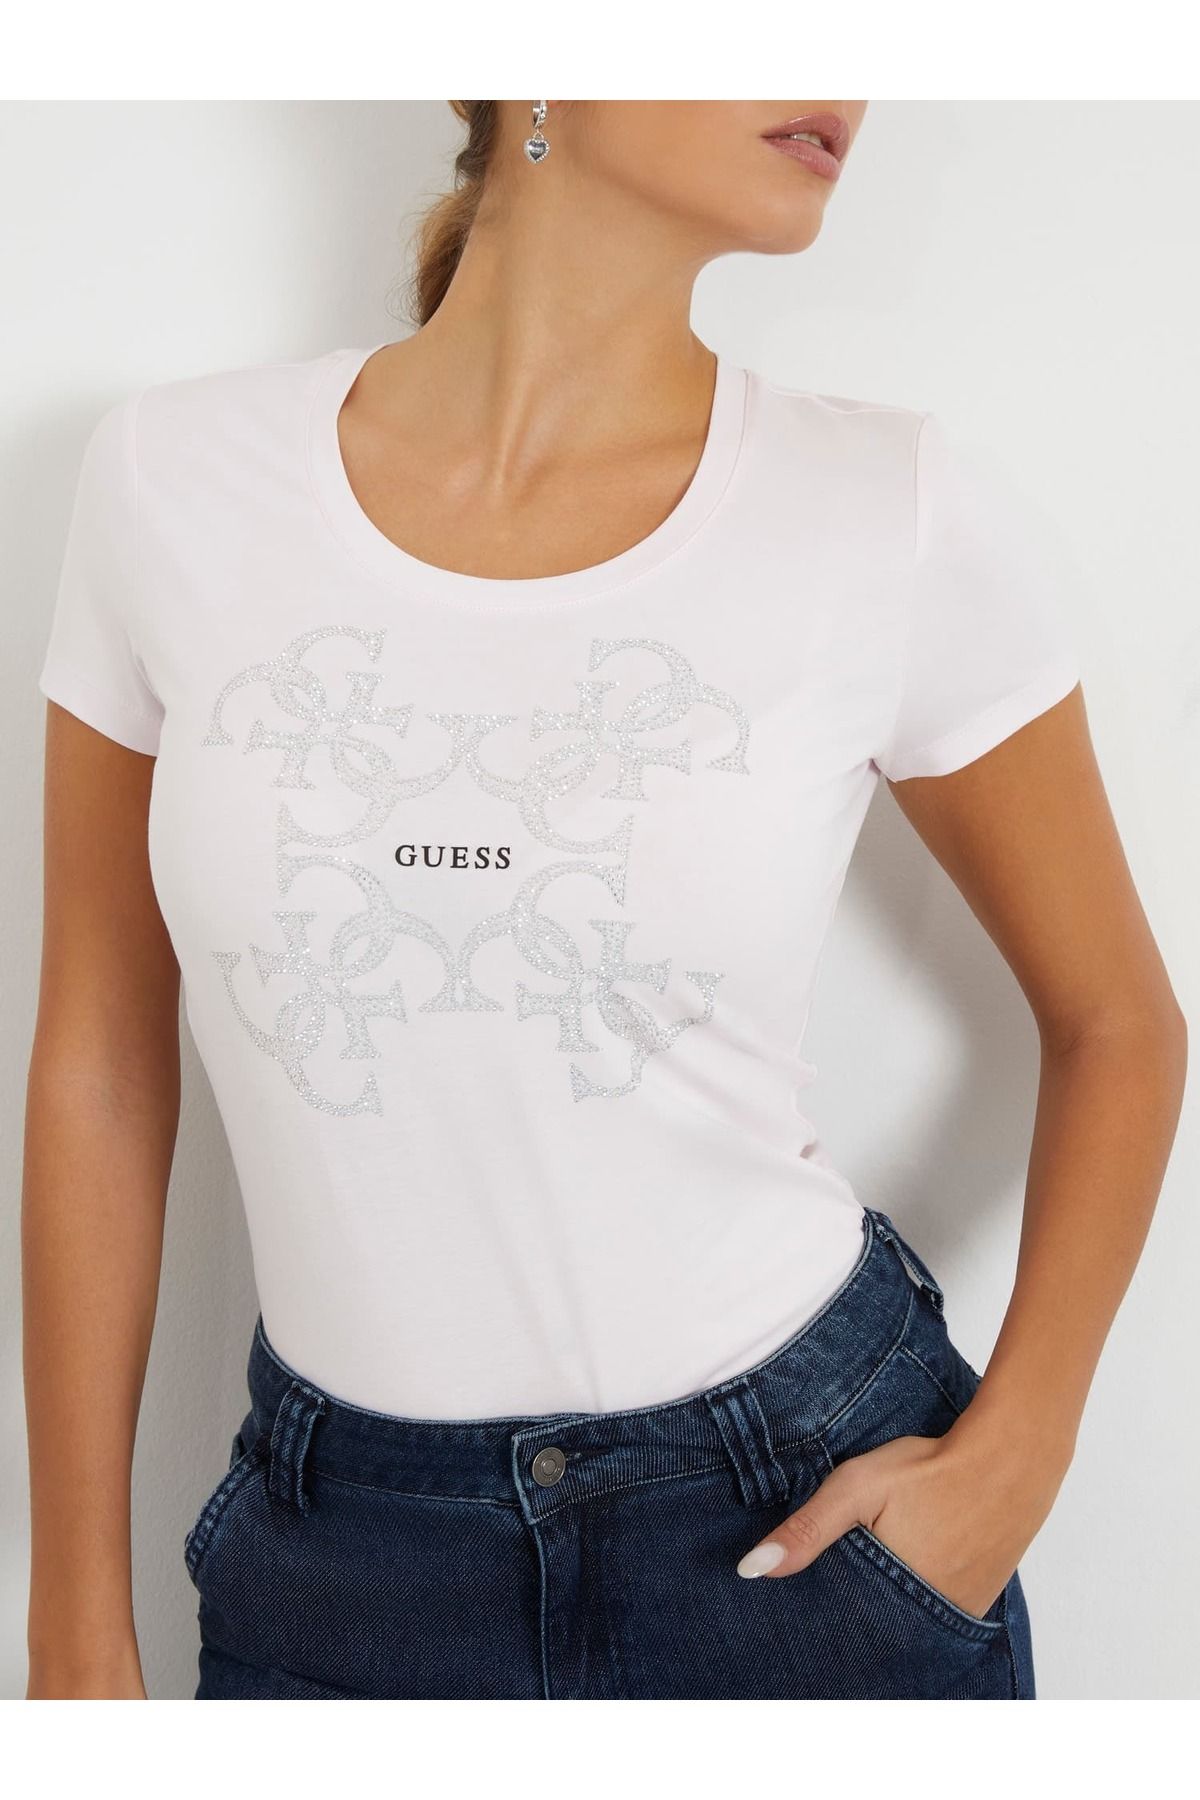 Guess 4G آرم زنان تی شرت Slim Fit